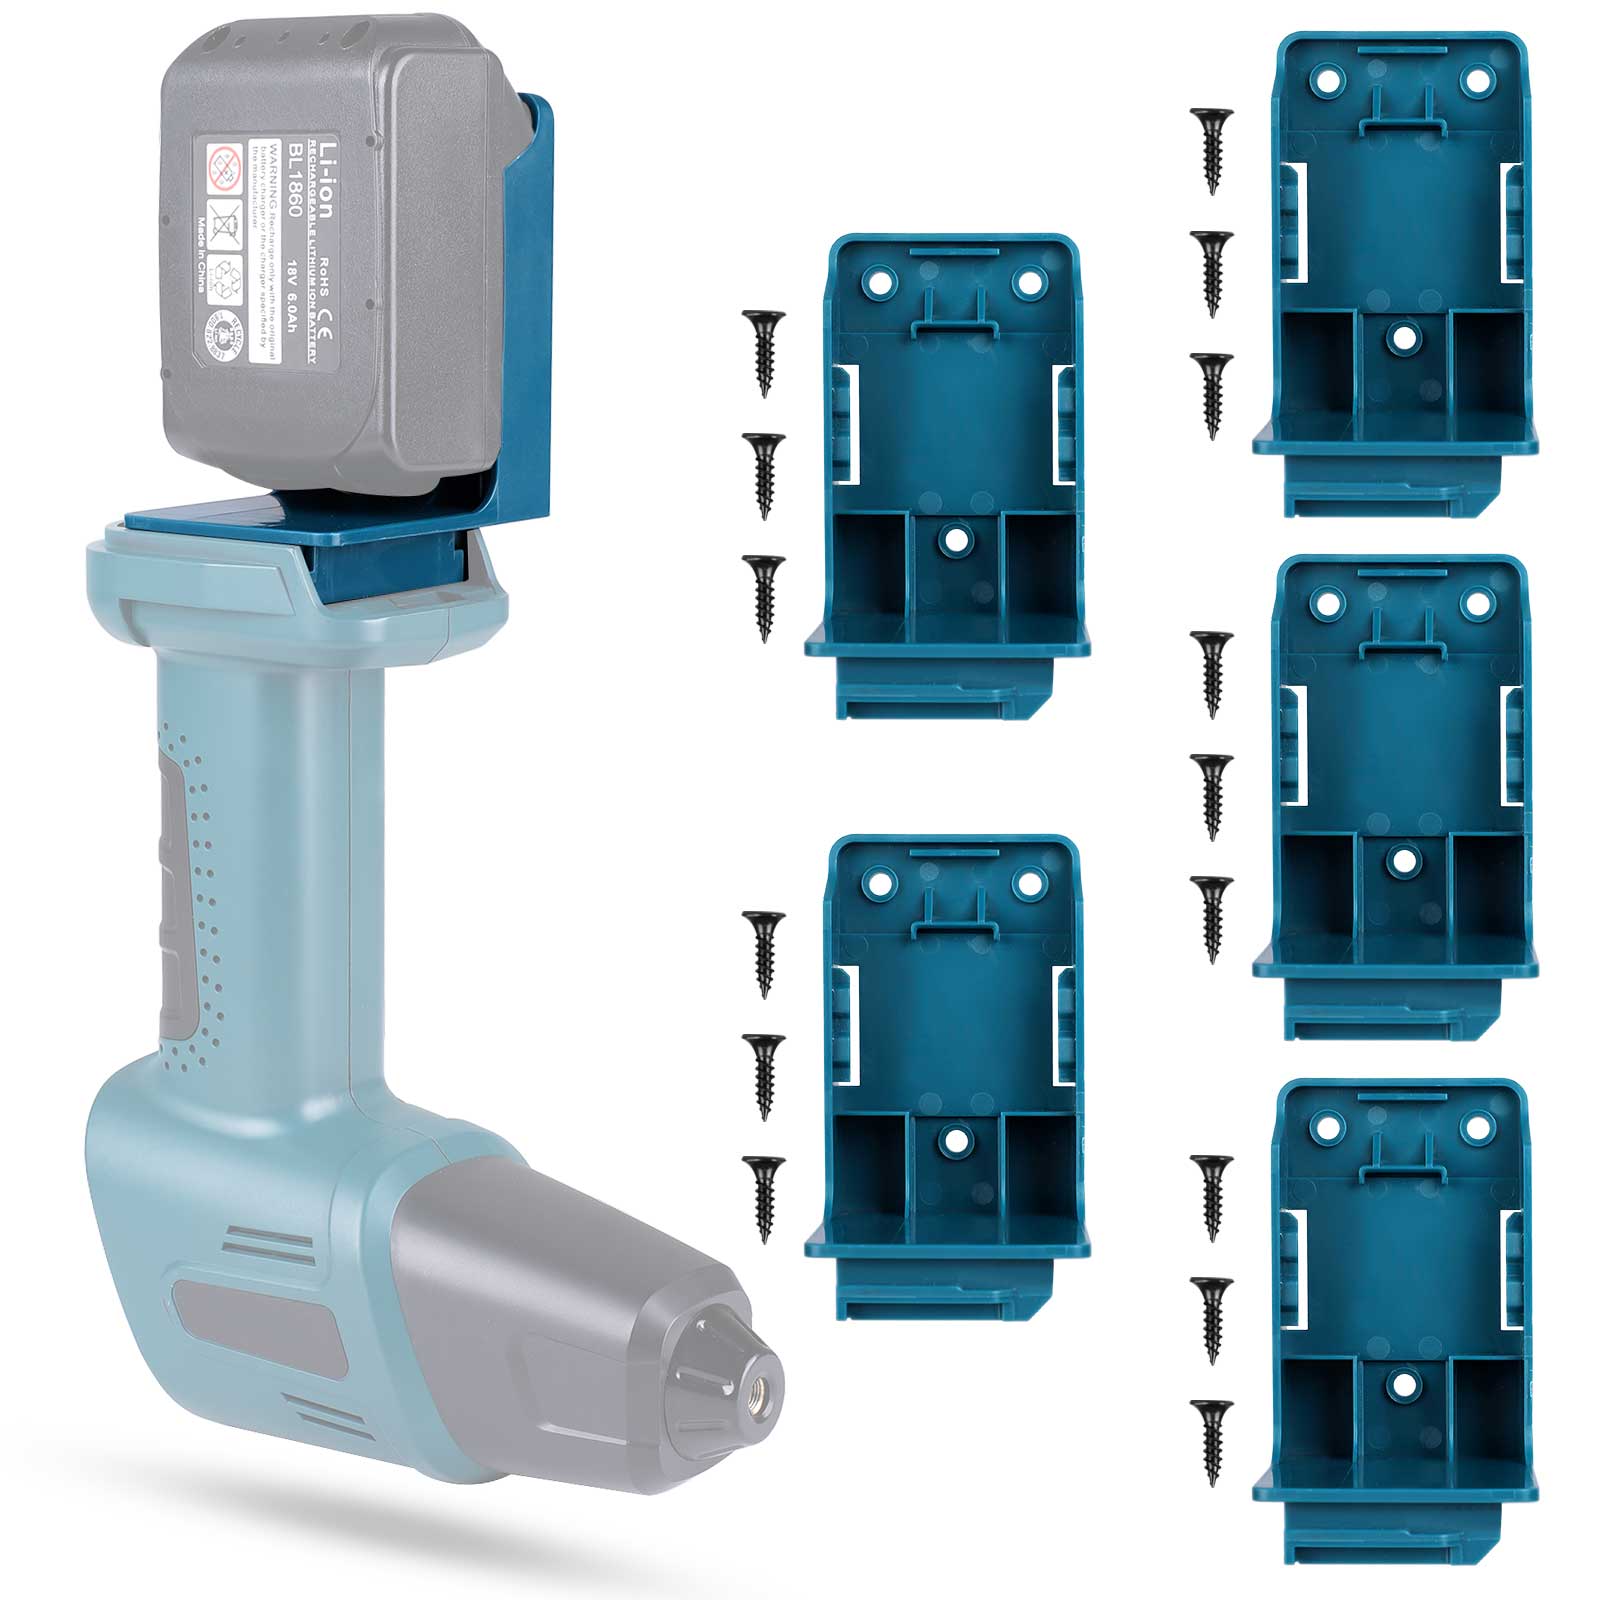 Application of a holder for storing and fixing power tools and batteries